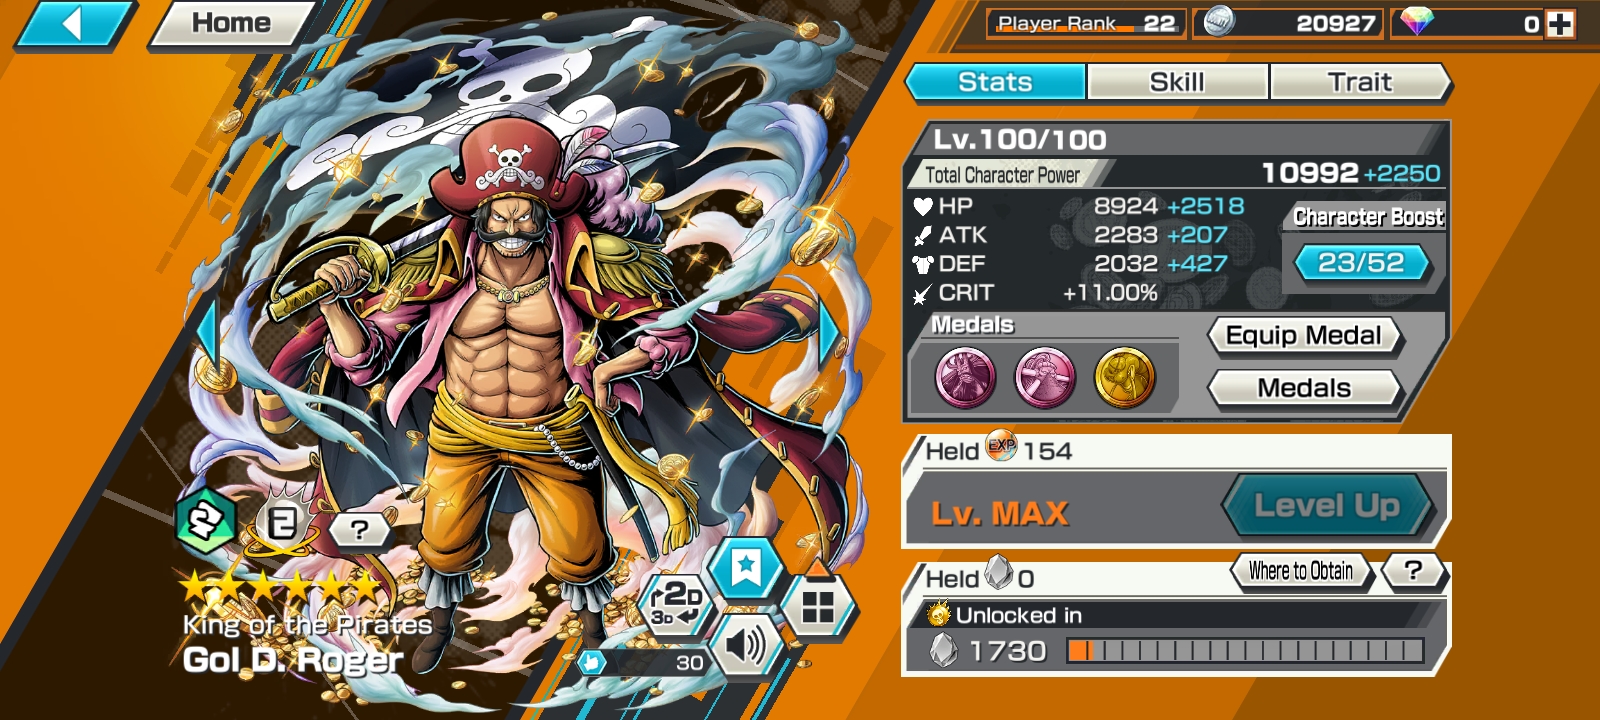 IOS+Android-Roger Ex Max-Good BF King Alber max+Queen Max+Sanji+Oden v2+Marco+Rayleigh v2-Good Medal-SP 126%-HP804